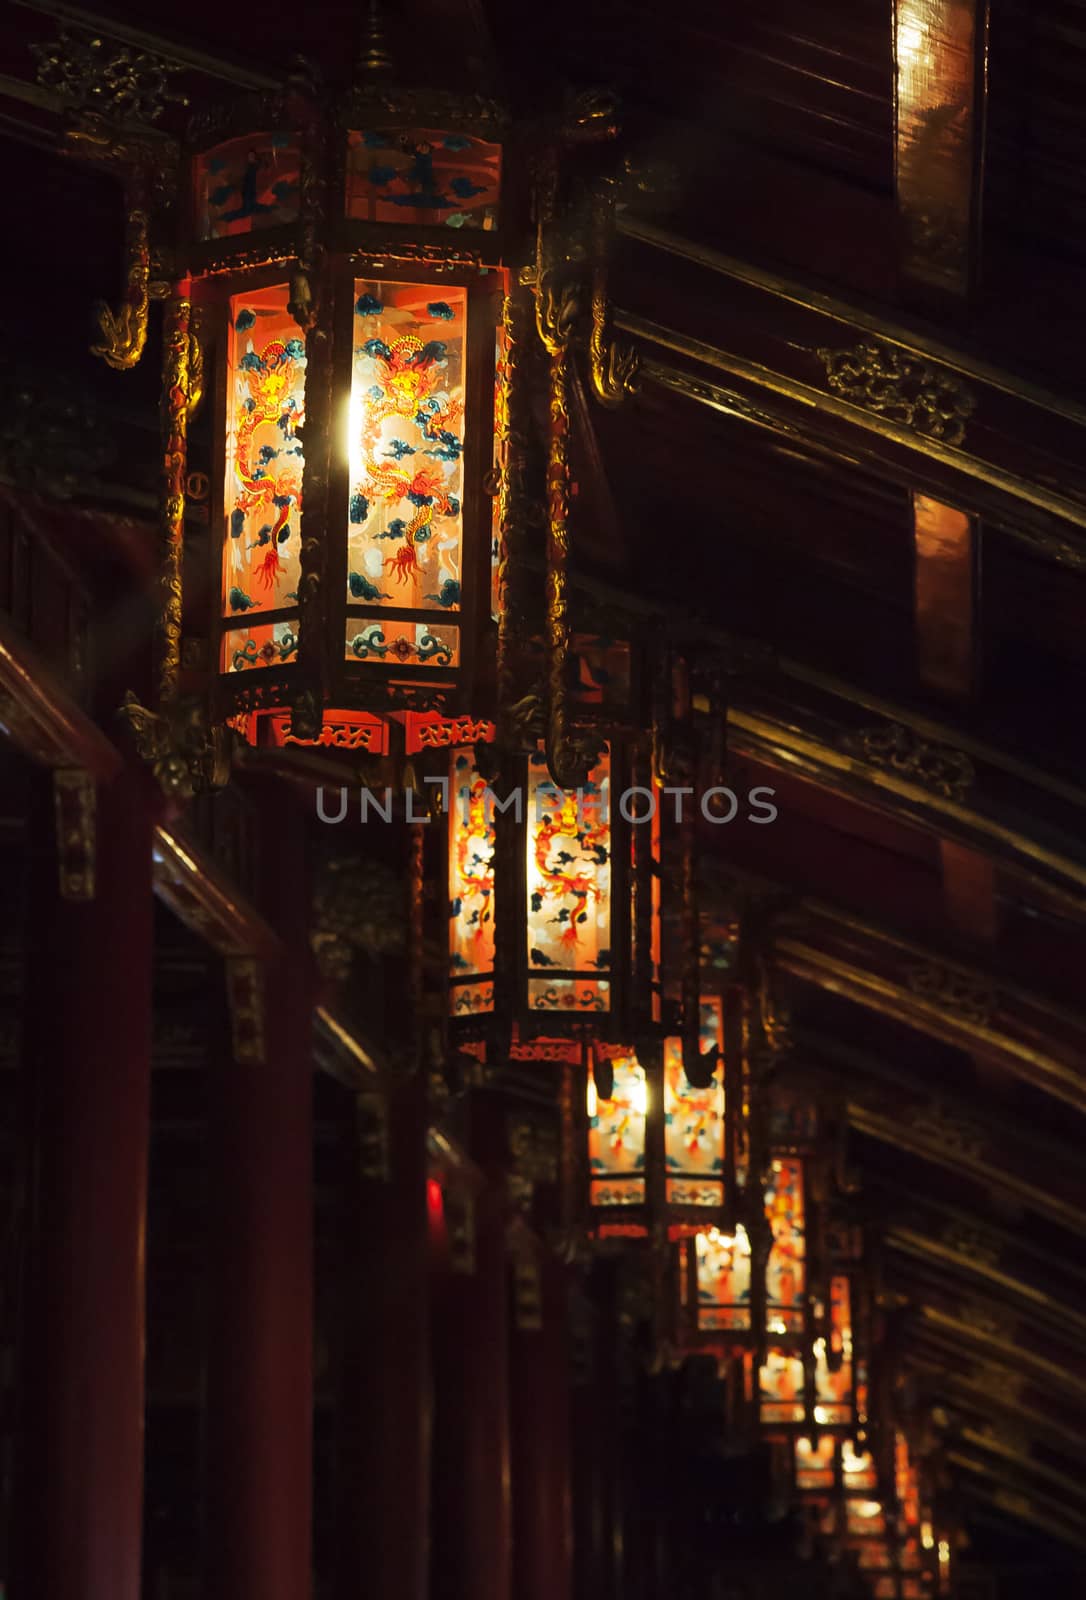 Glowing decorative Chinese lanterns, hanging from the ceiling